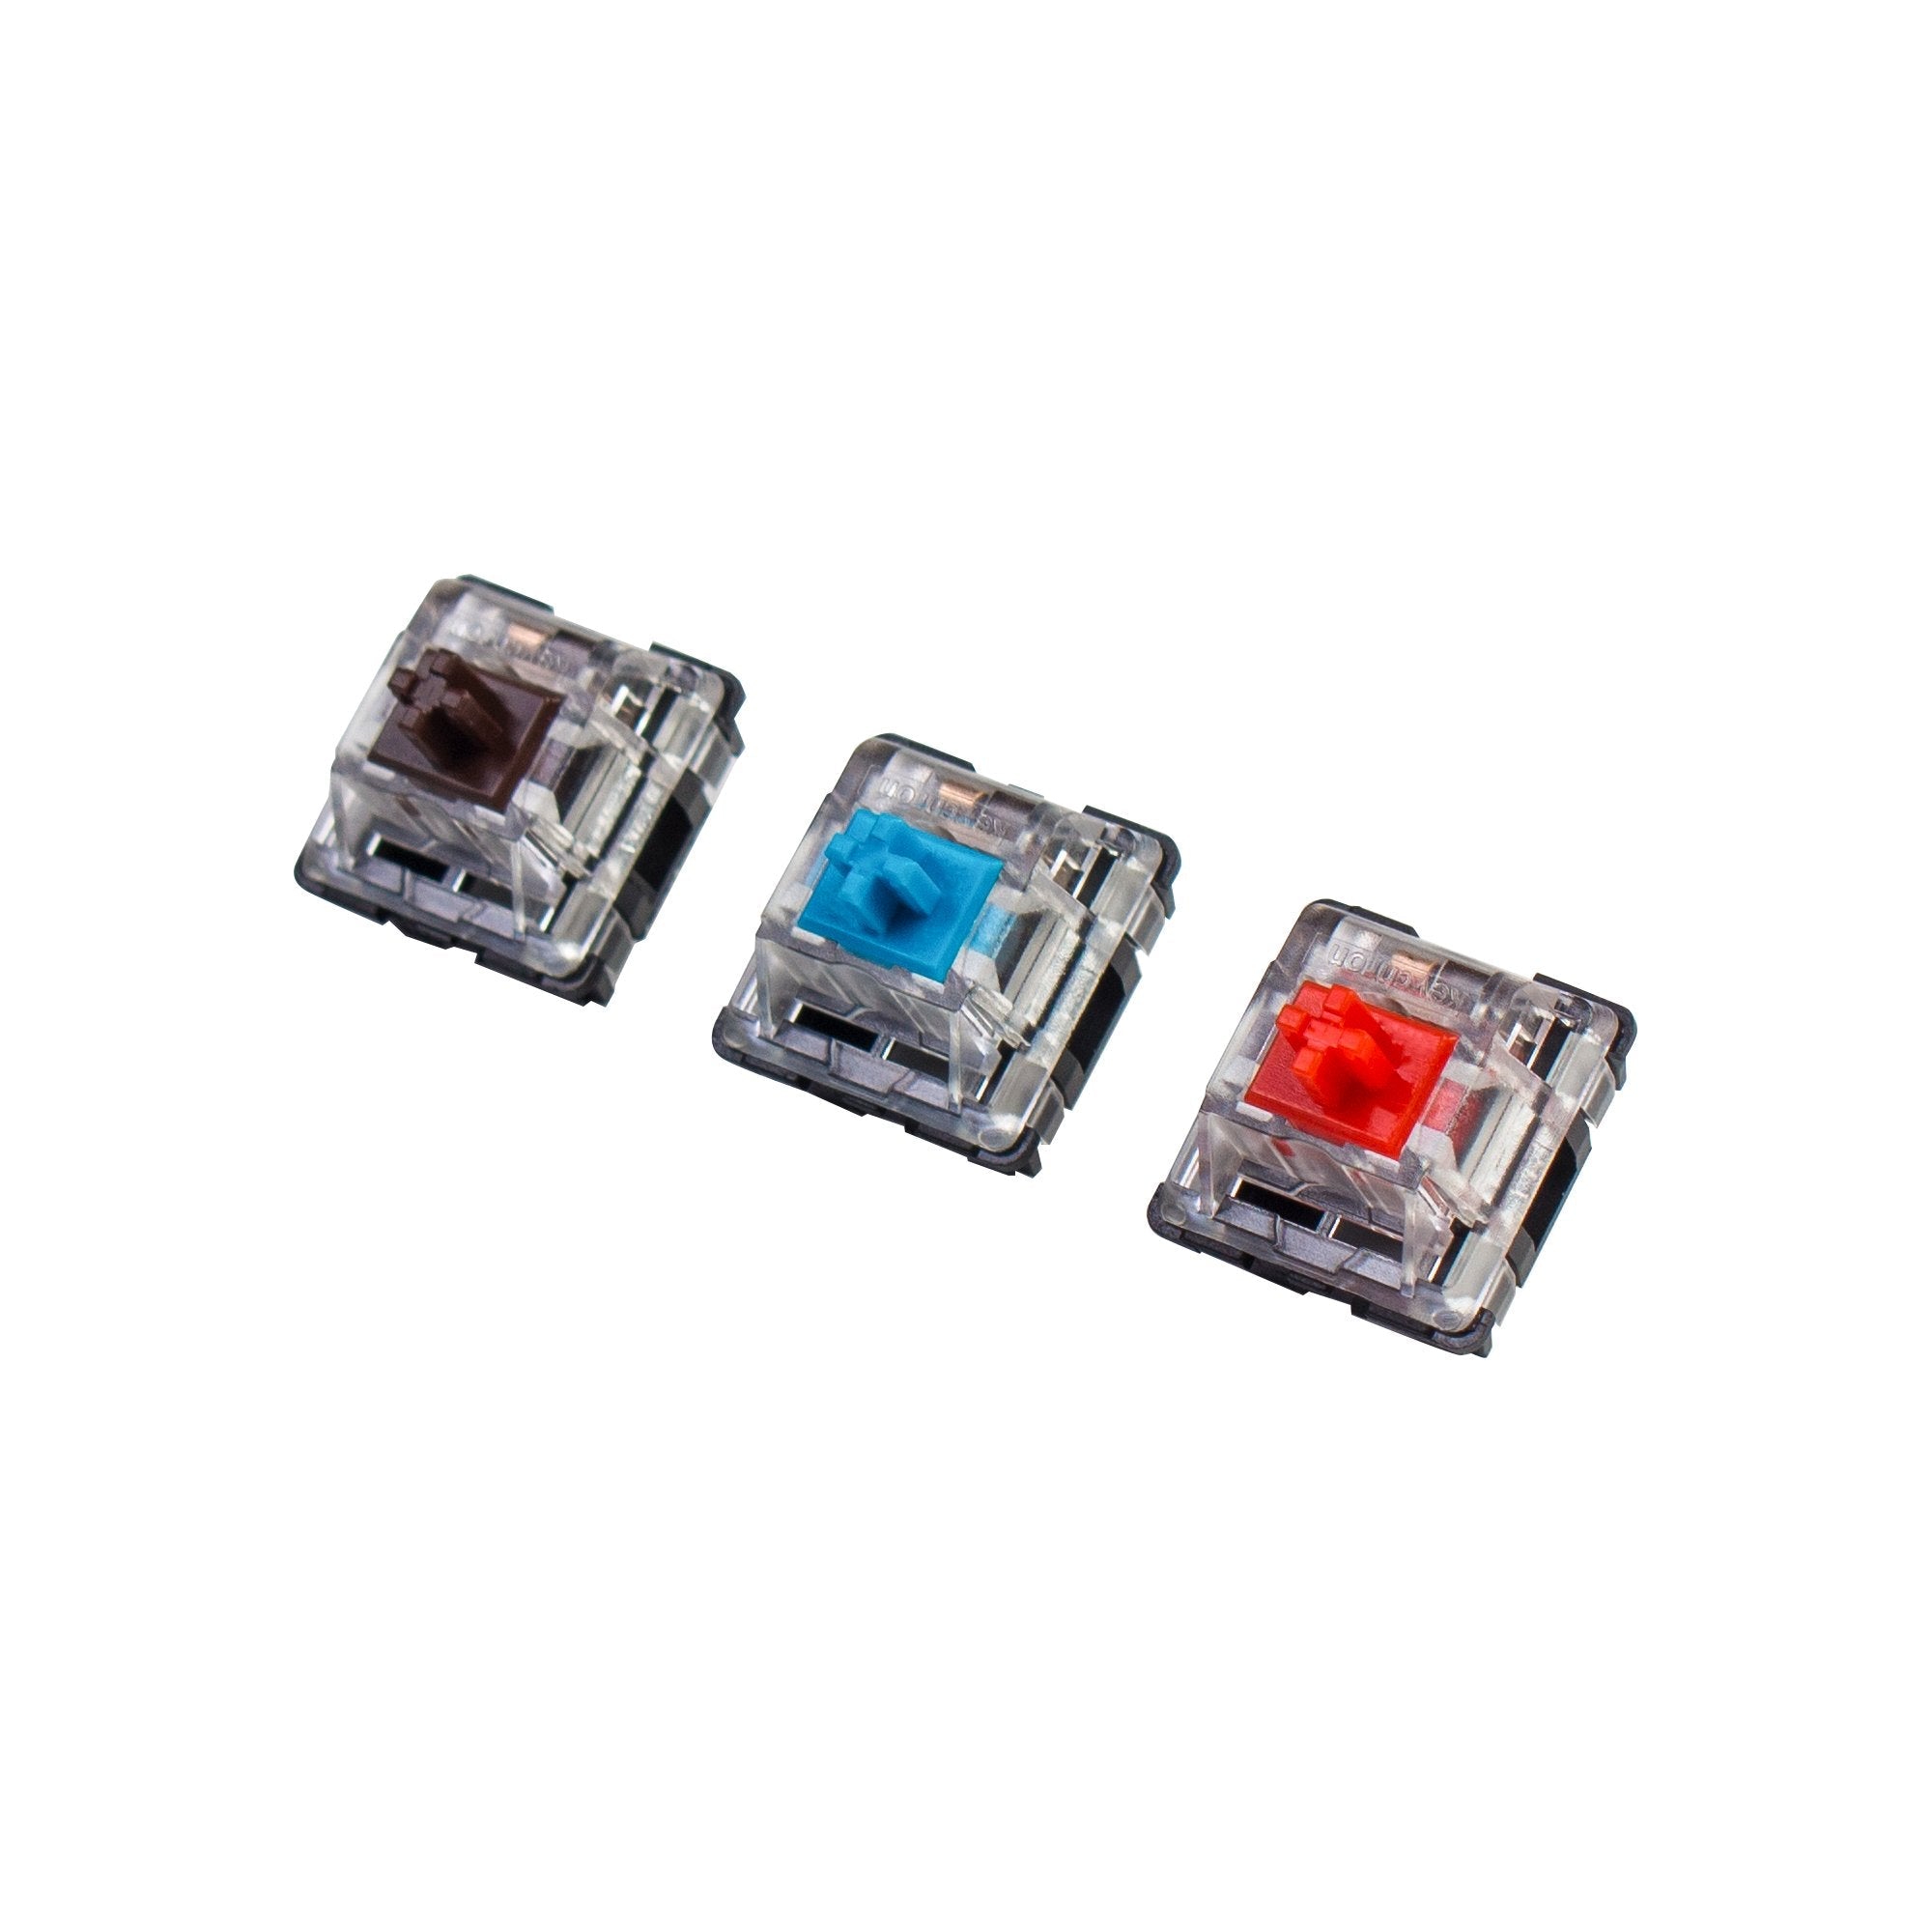 Keychron Mechanical Red Blue Brown Switch Set family